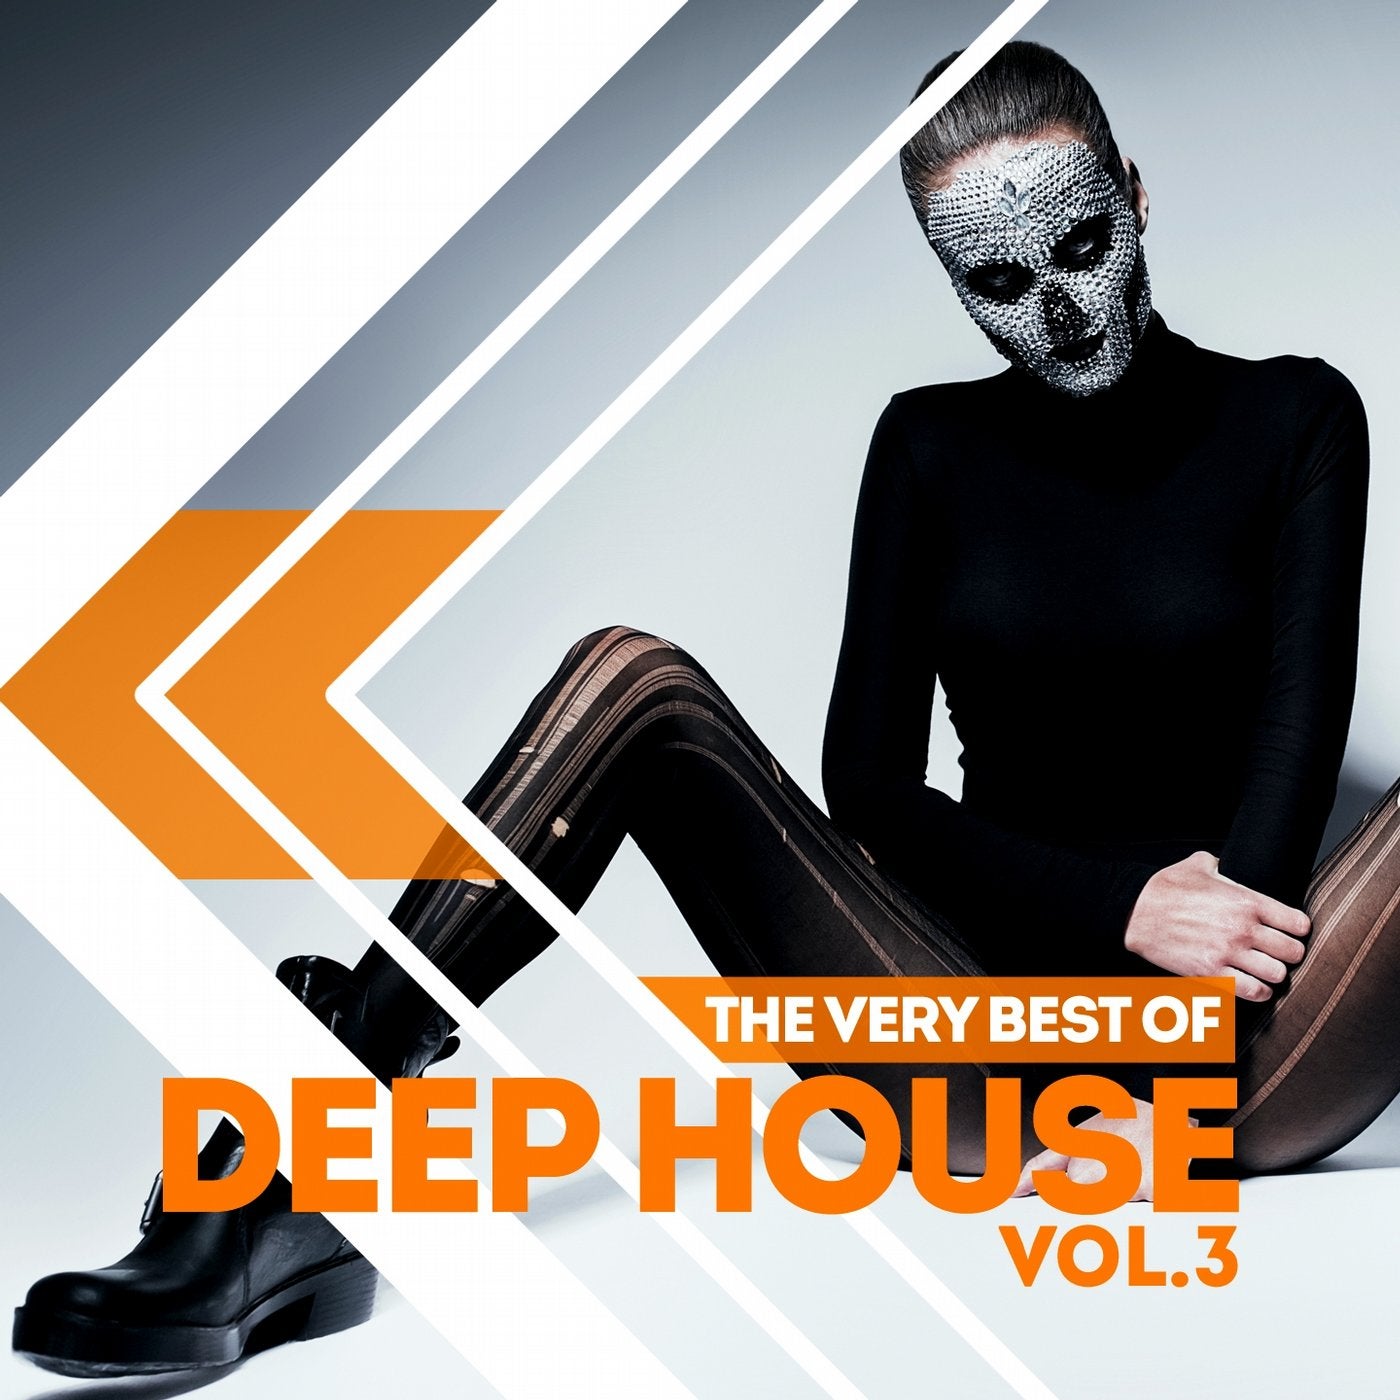 The Very Best of Deep House, Vol. 3